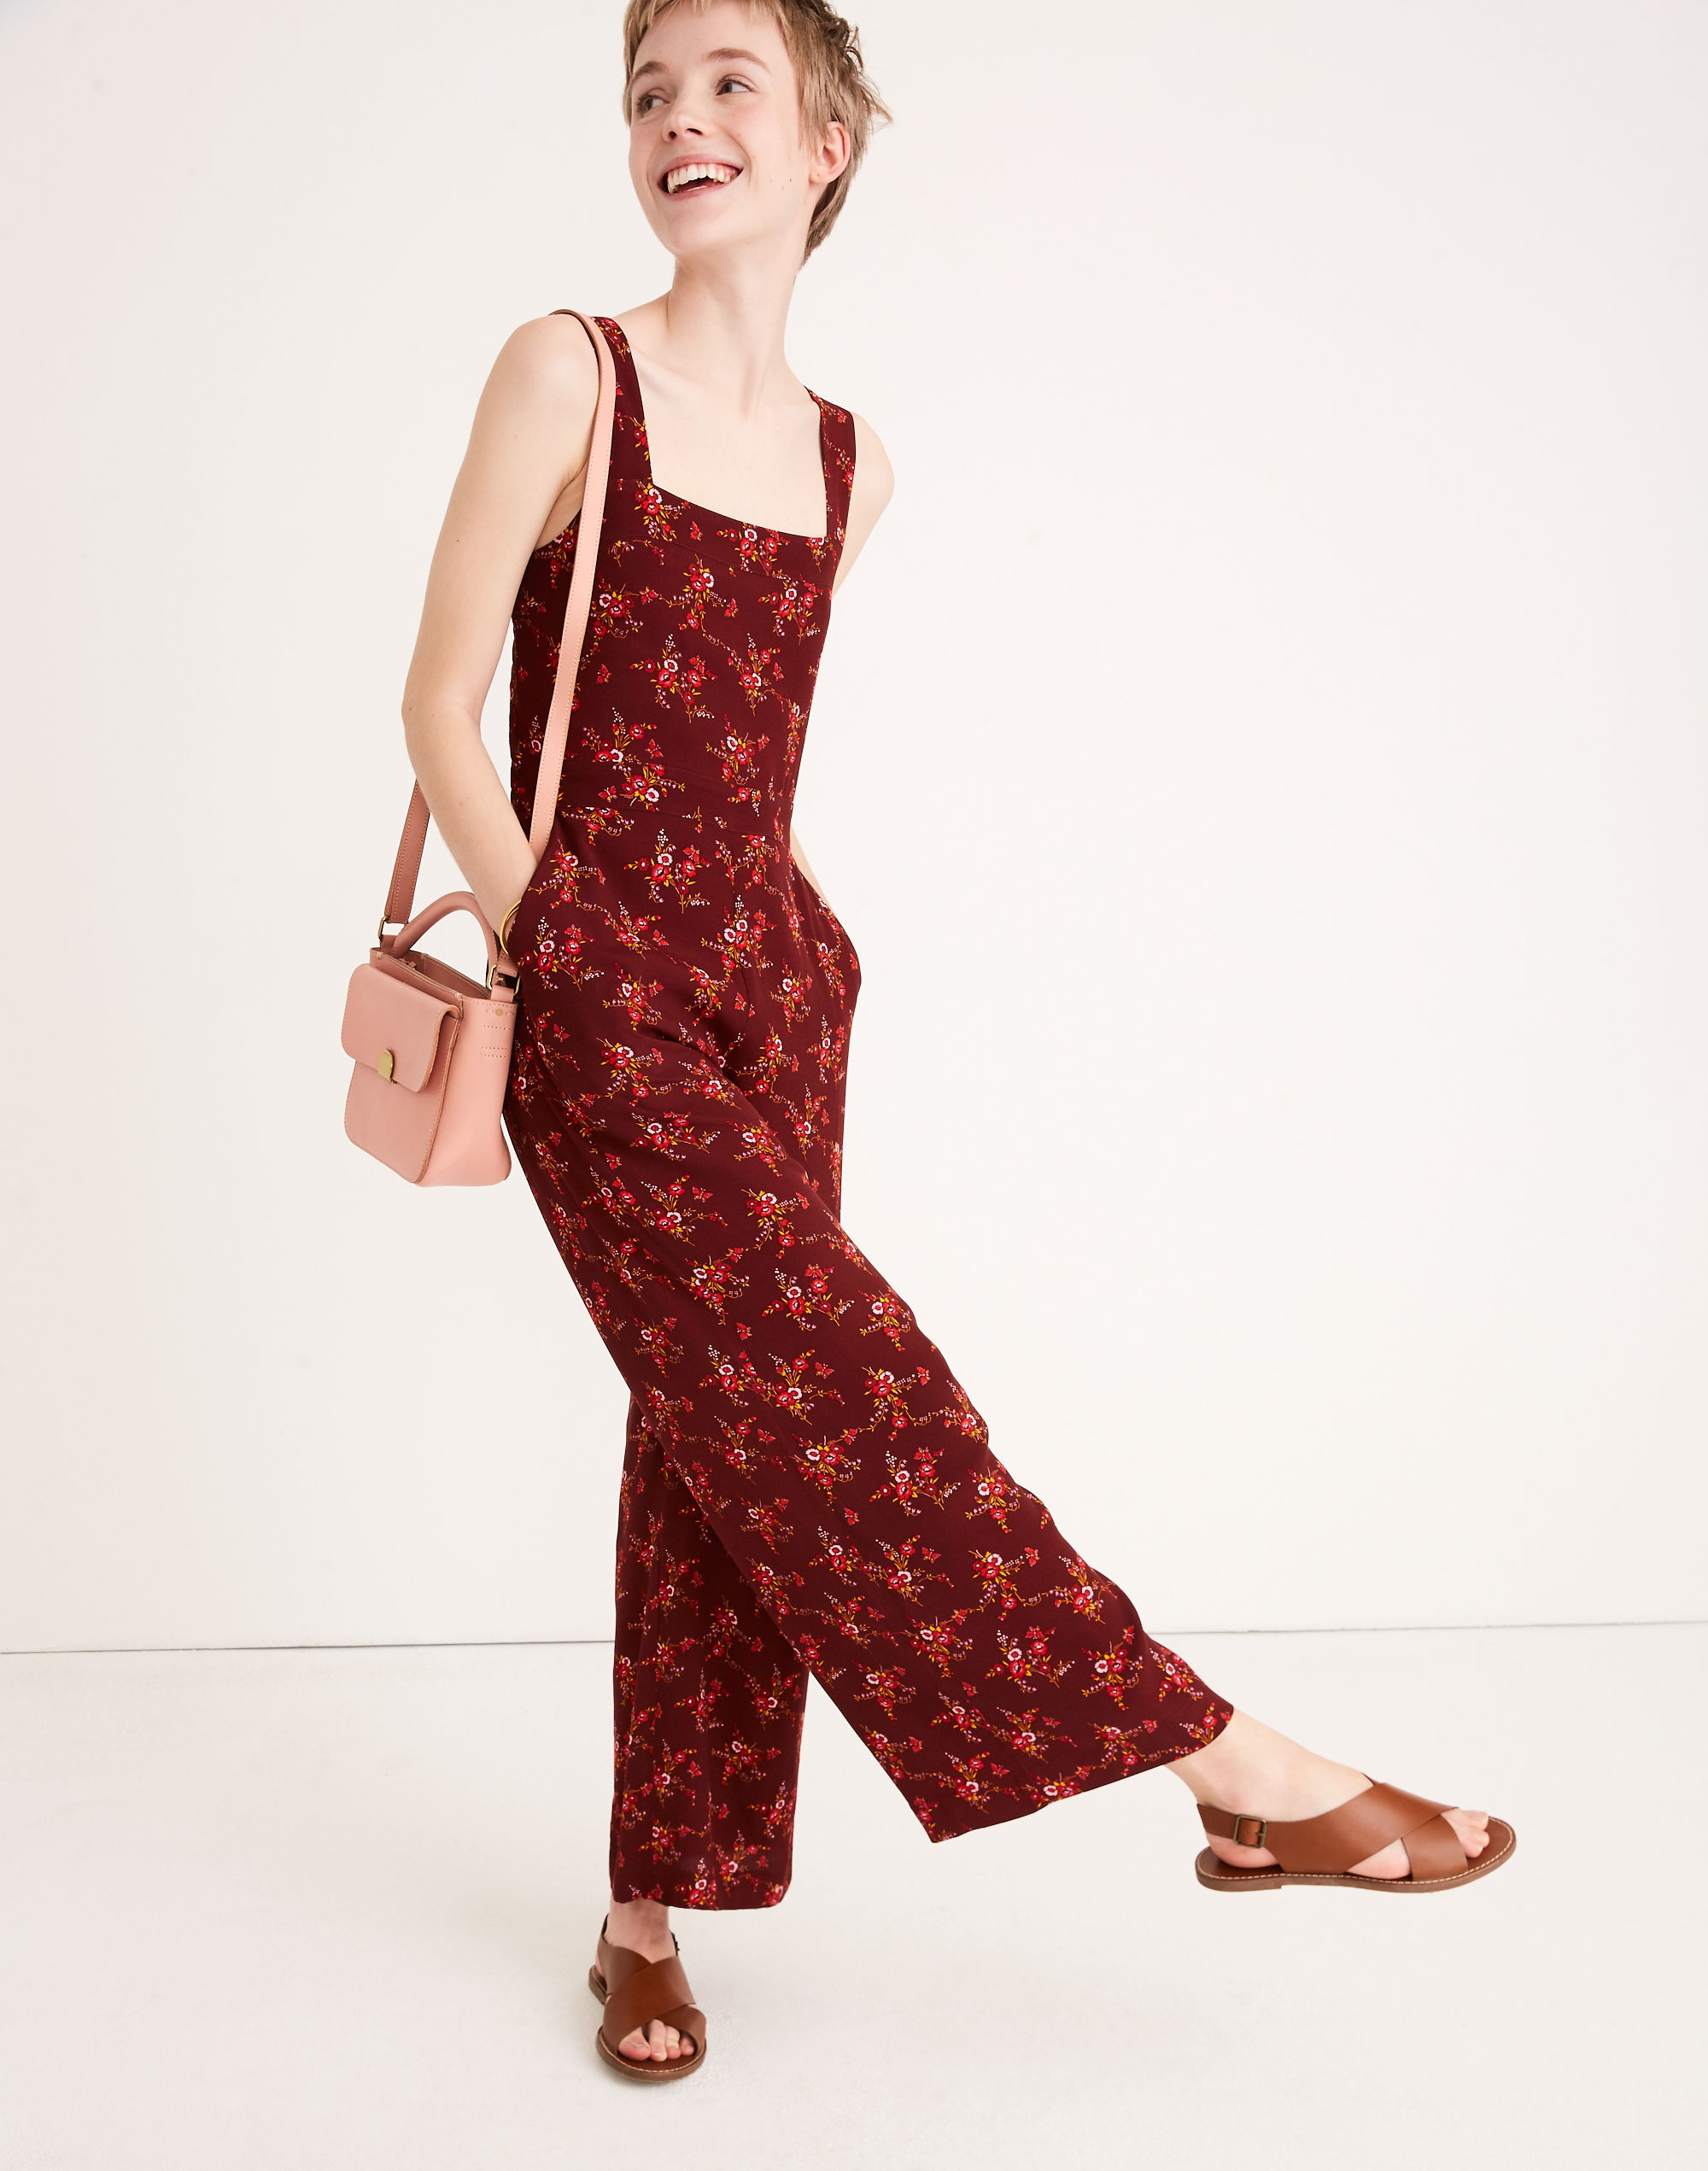 Apron Bow-Back Jumpsuit in Windowbox Floral